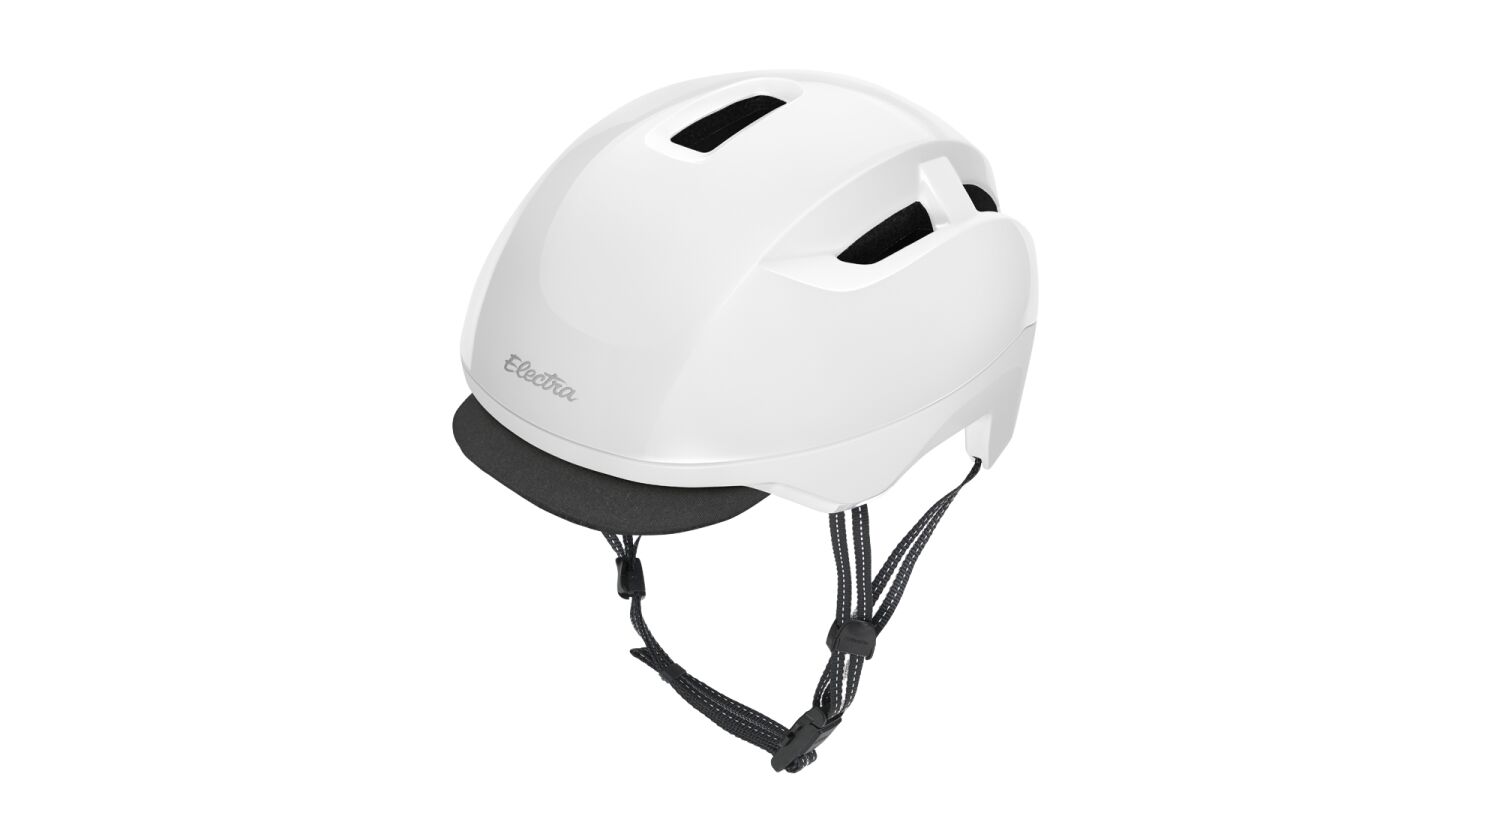 Electra Go! Mips Helm white